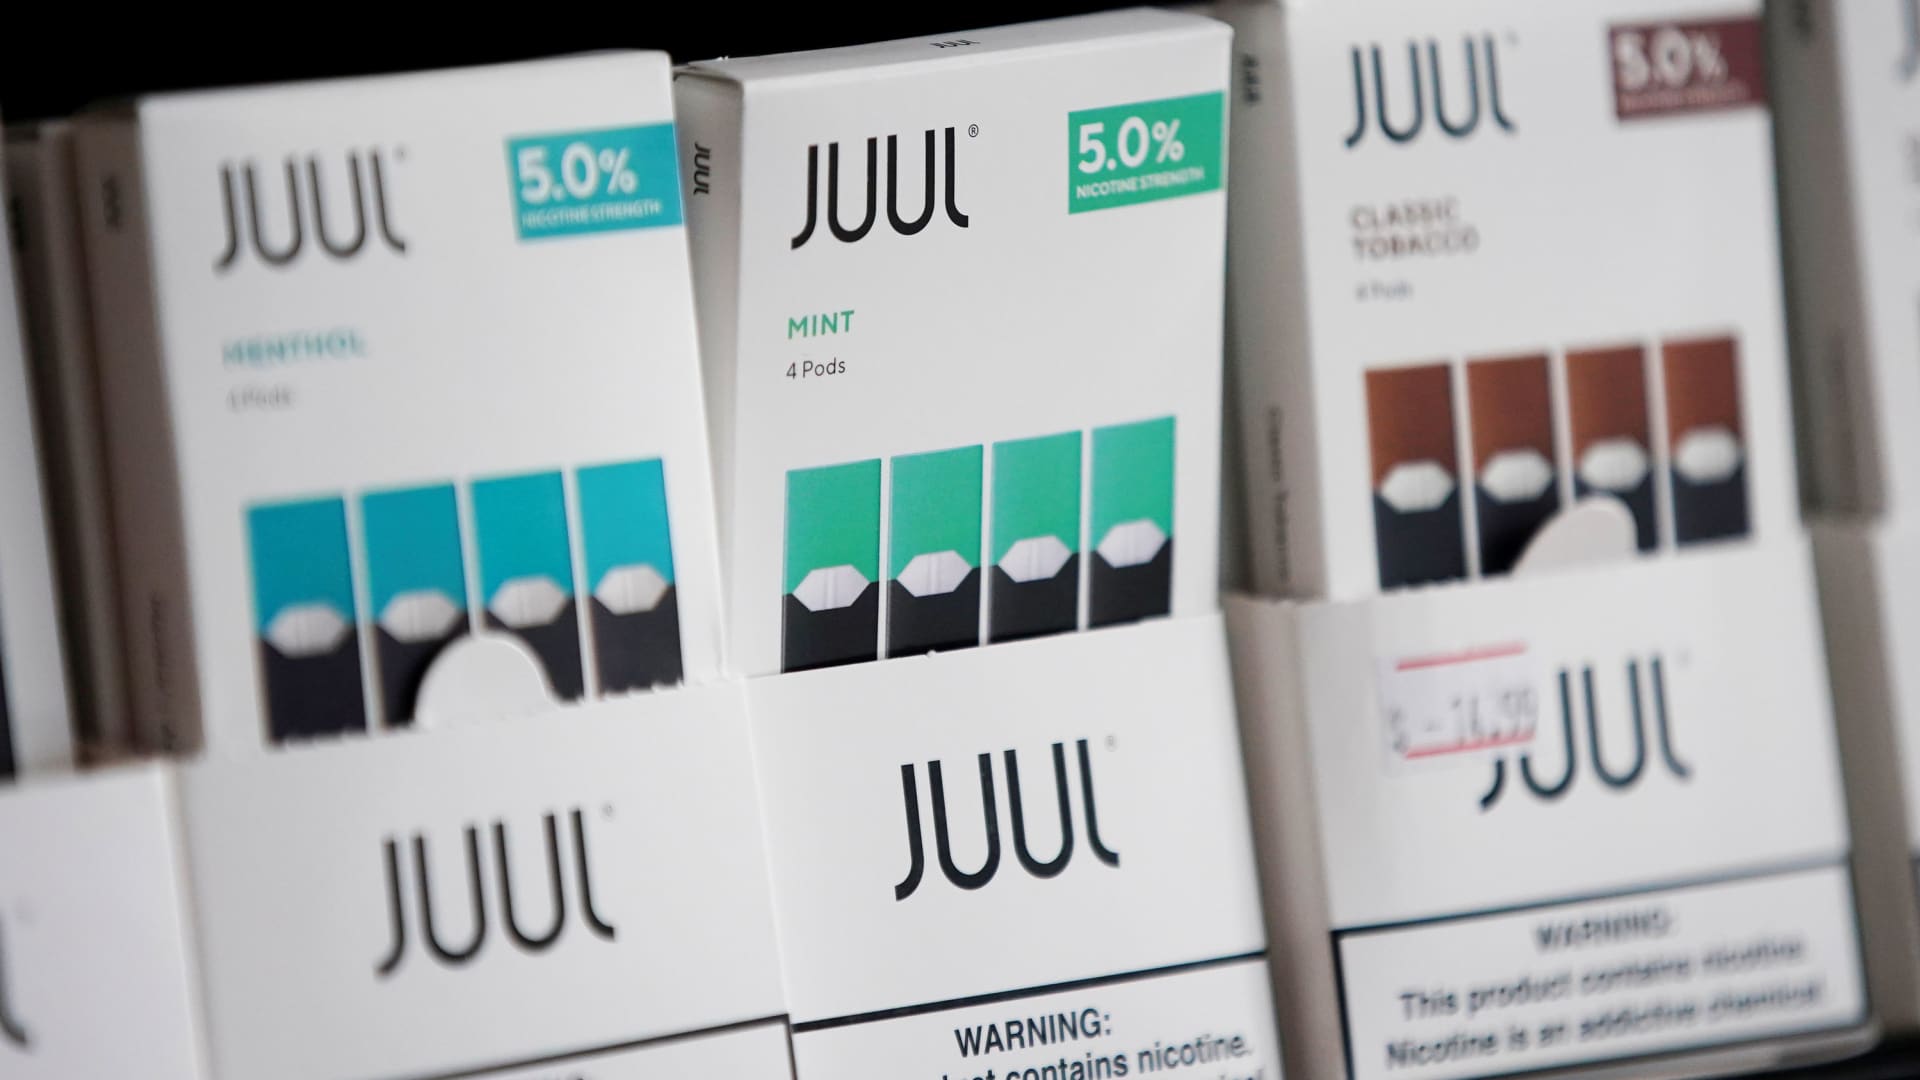 Juul asks court for temporary block on FDA’s ban of its e-cigarettes – CNBC